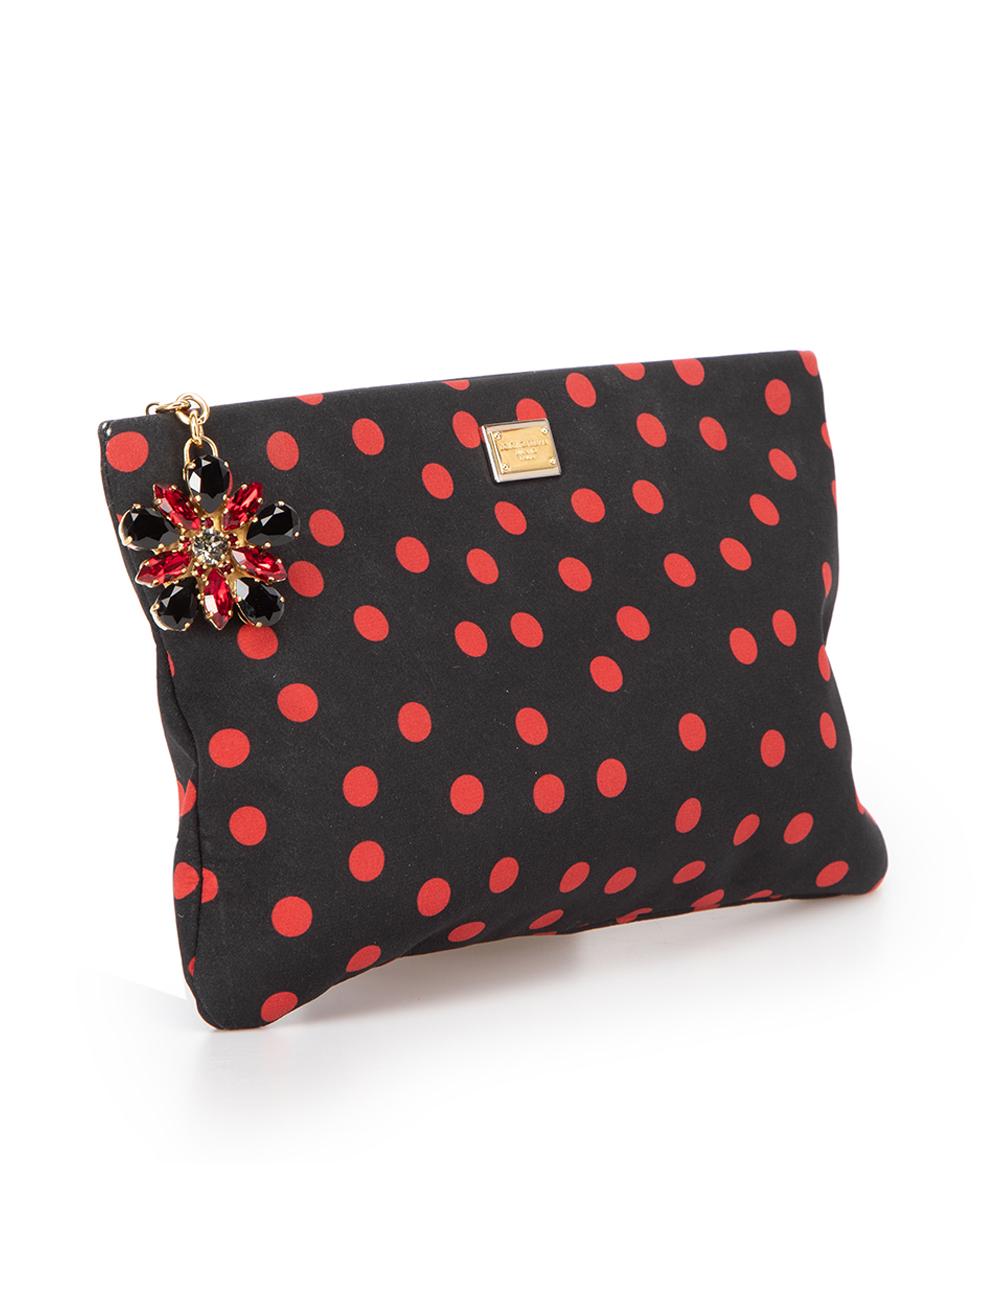 CONDITION is Very good. Hardly any visible wear to clutch is evident on this used Dolce & Gabbana designer resale item.



Details


Black

Cloth

Red polka-dots

Zip closure with crystal flower embellishment

1x Main compartment

1x Internal zip